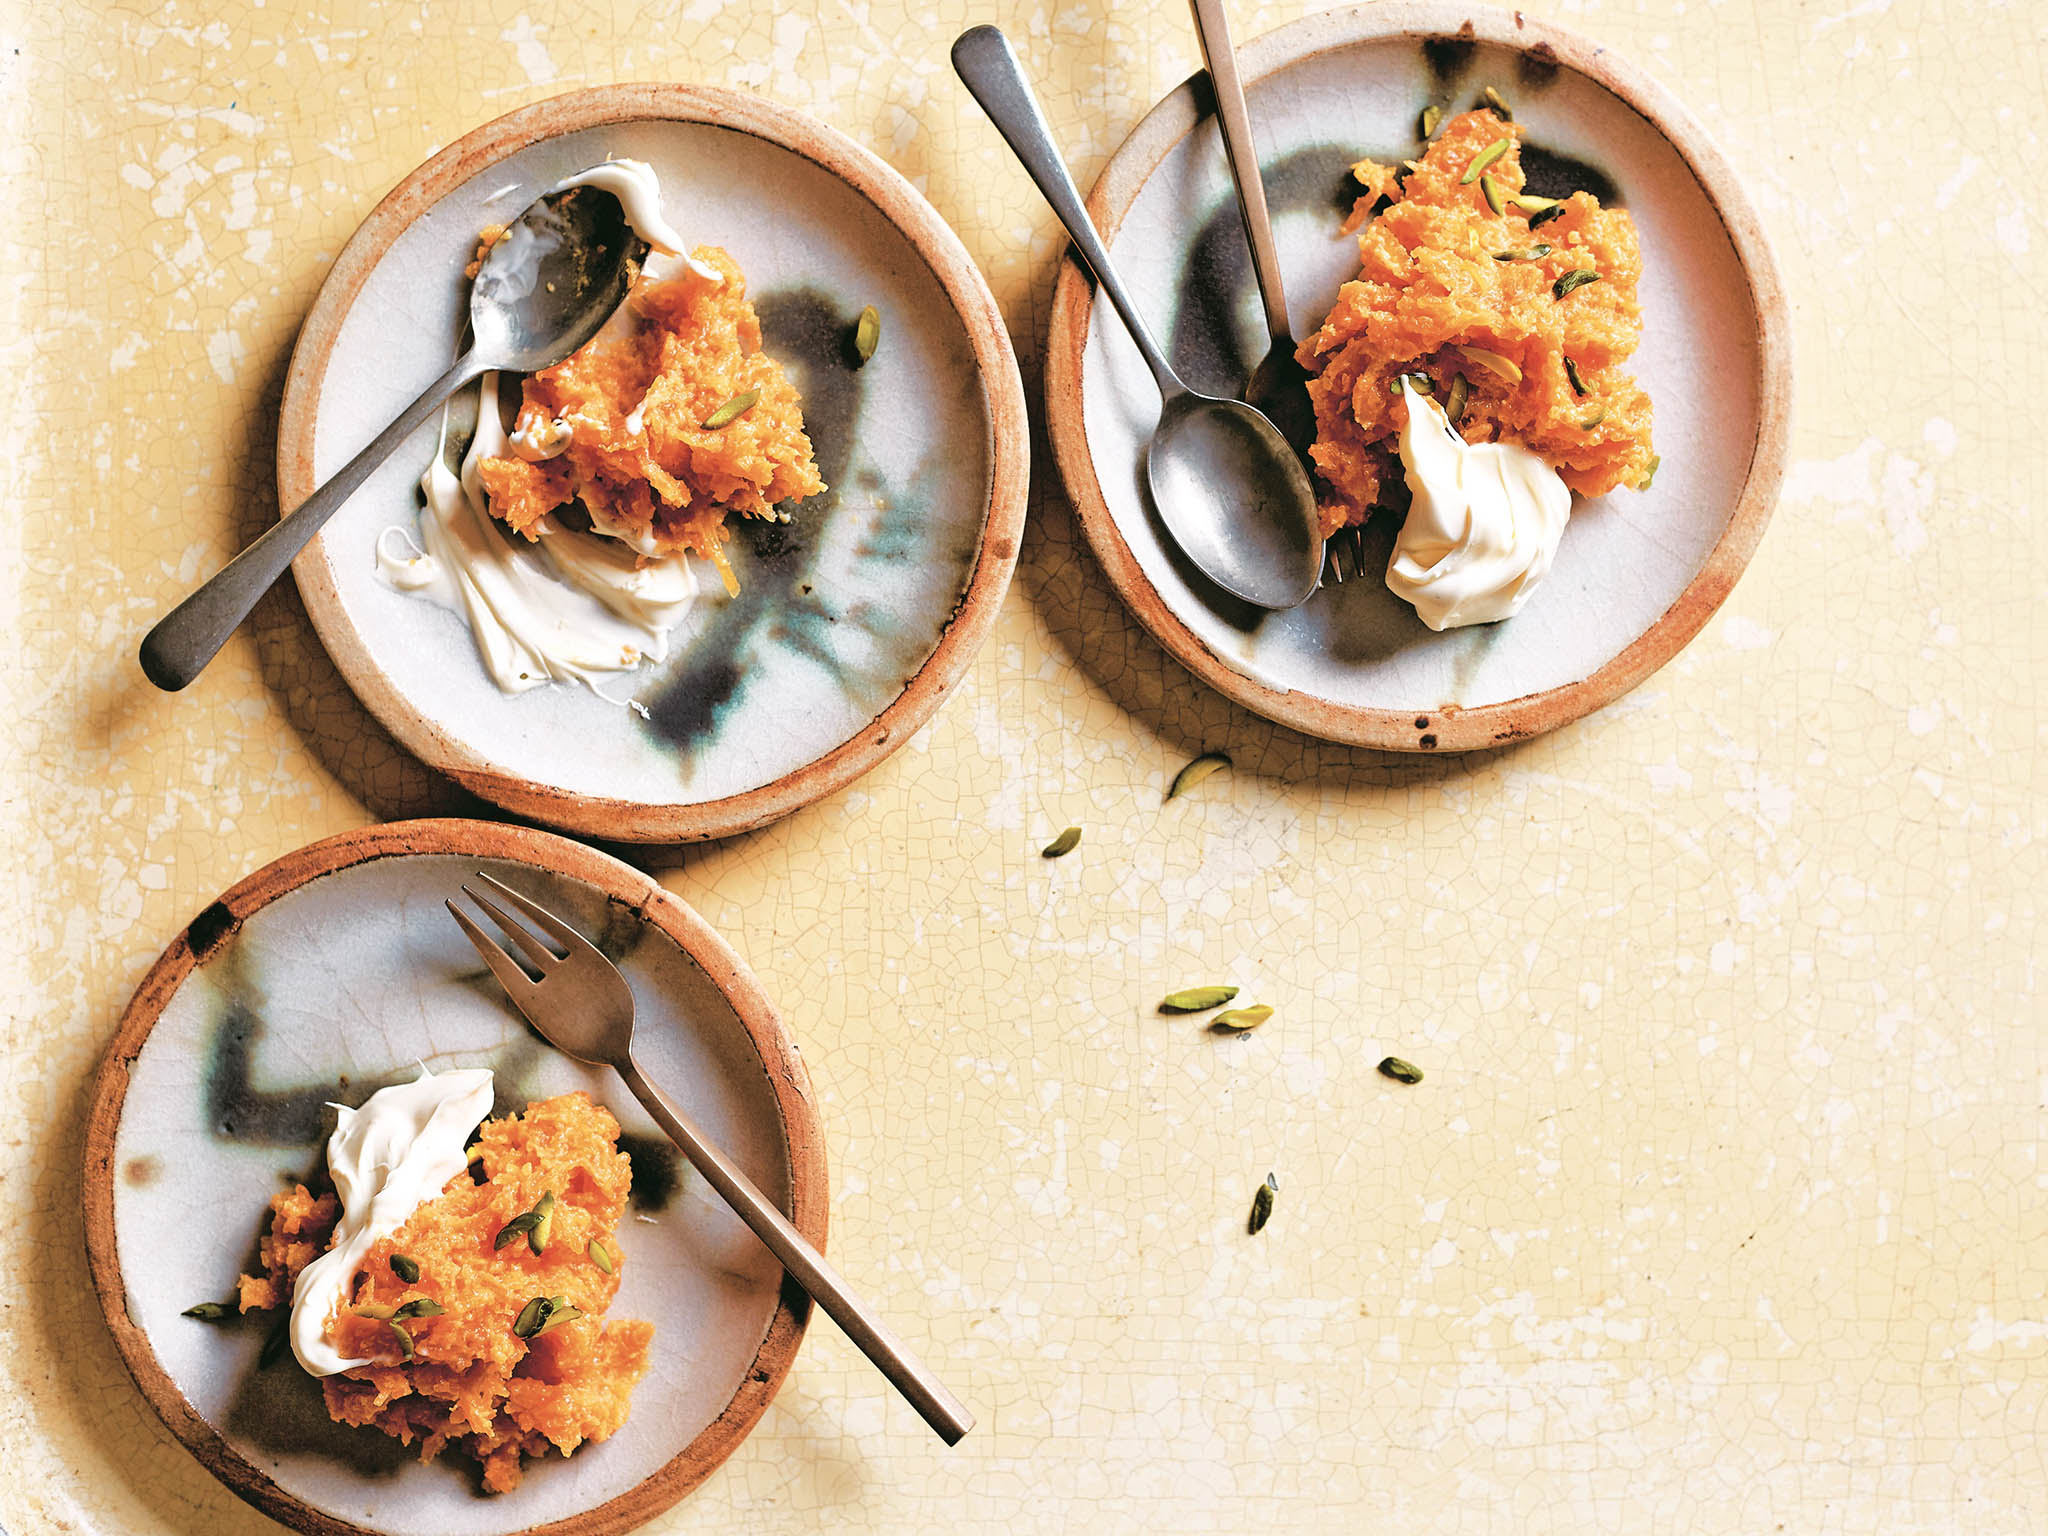 This slow cooked carrot dessert is a labour of love